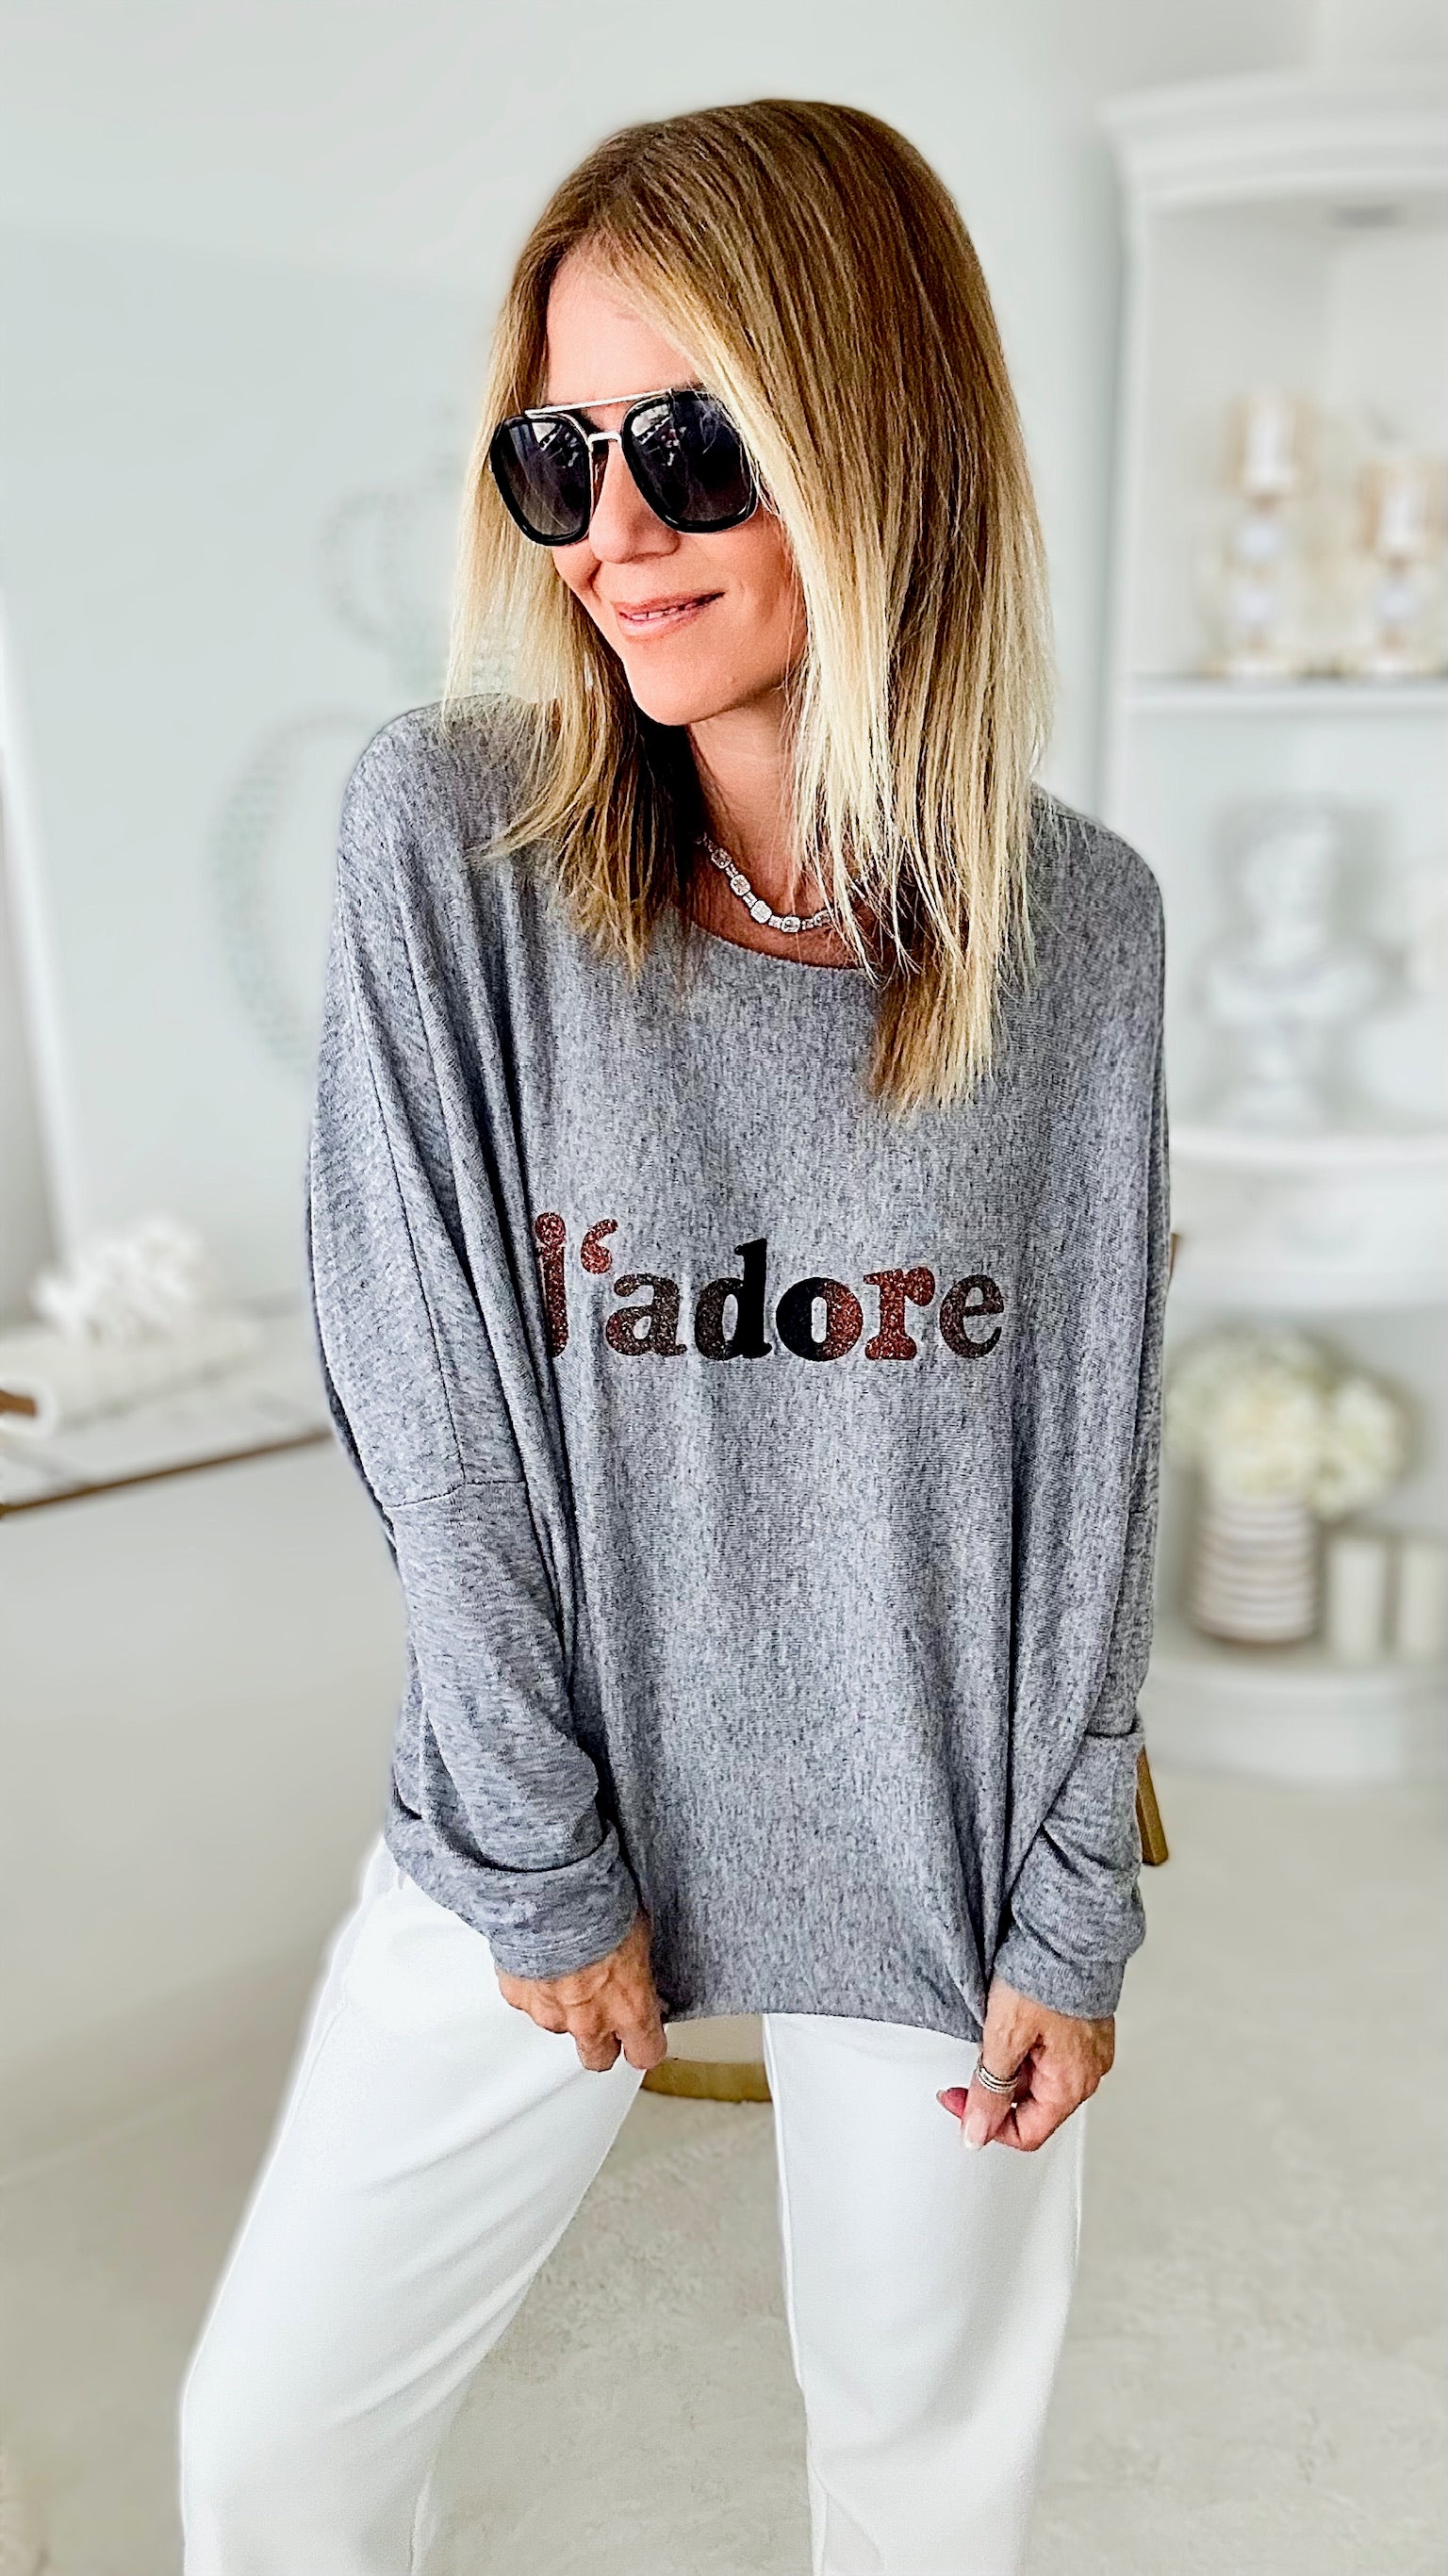 Italian J'adore Long Sleeve Pullover - Grey-130 Long Sleeve Tops-Yolly-Coastal Bloom Boutique, find the trendiest versions of the popular styles and looks Located in Indialantic, FL